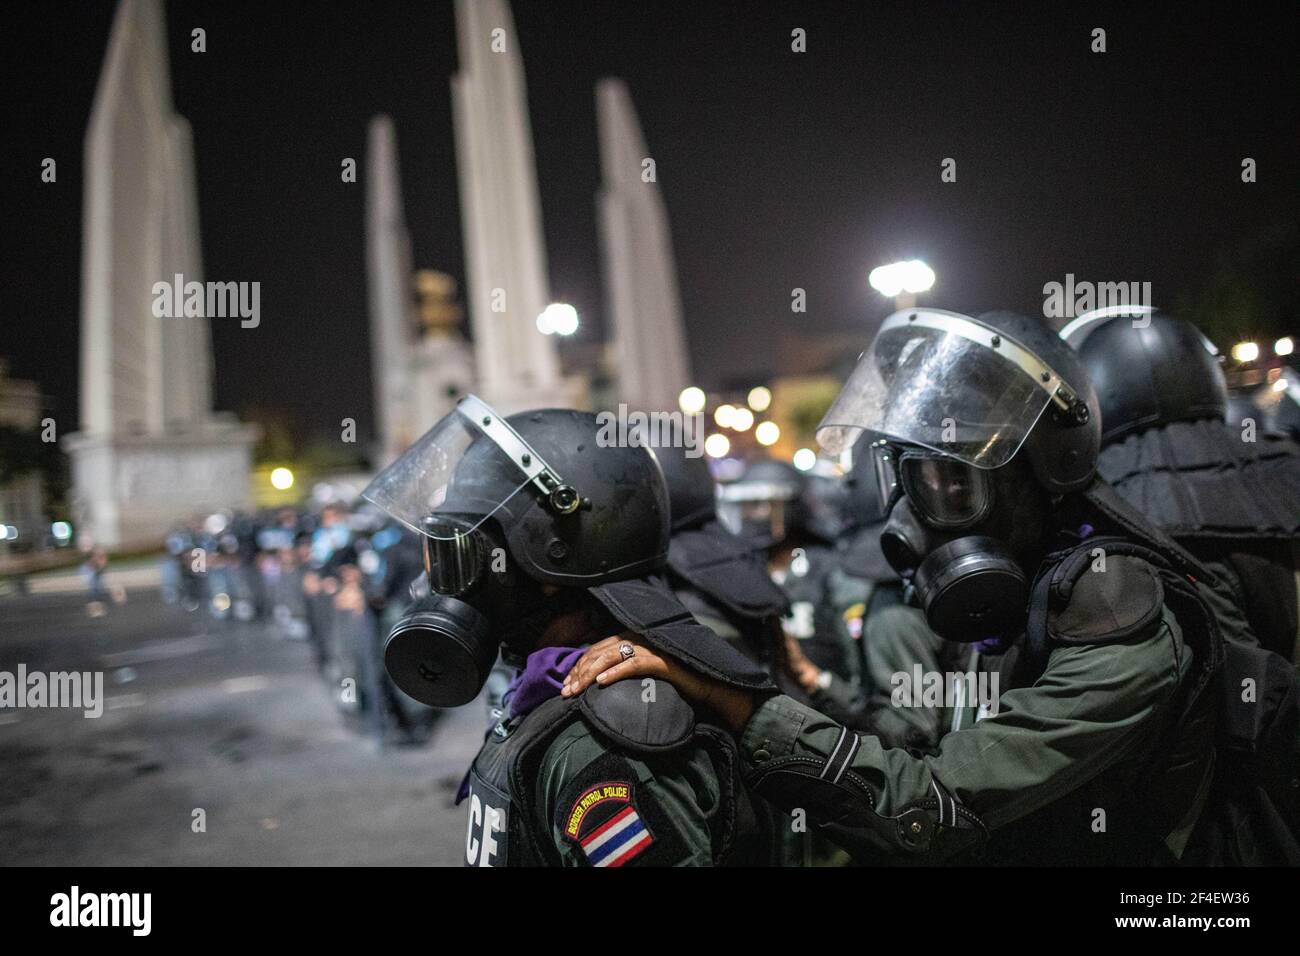 Riot police officers wearing gas mask stand guard near the Democracy Monument during an anti-government demonstration in Bangkok. Thousands of pro-democracy protesters gathered near the Grand Palace in Sanam Luang demanding the resignation of Thailand Prime Minister and the reform of the monarchy. The protesters also denounced the use of the Lese Majeste law under the section 112 of the penal code. The protest organized by REDEM (Restart Democracy) ended up with several clashes, the use of water cannon, tear gas and rubber bullet, which had left several injured. (Photo by Geem Drake / SOPA Ima Stock Photo